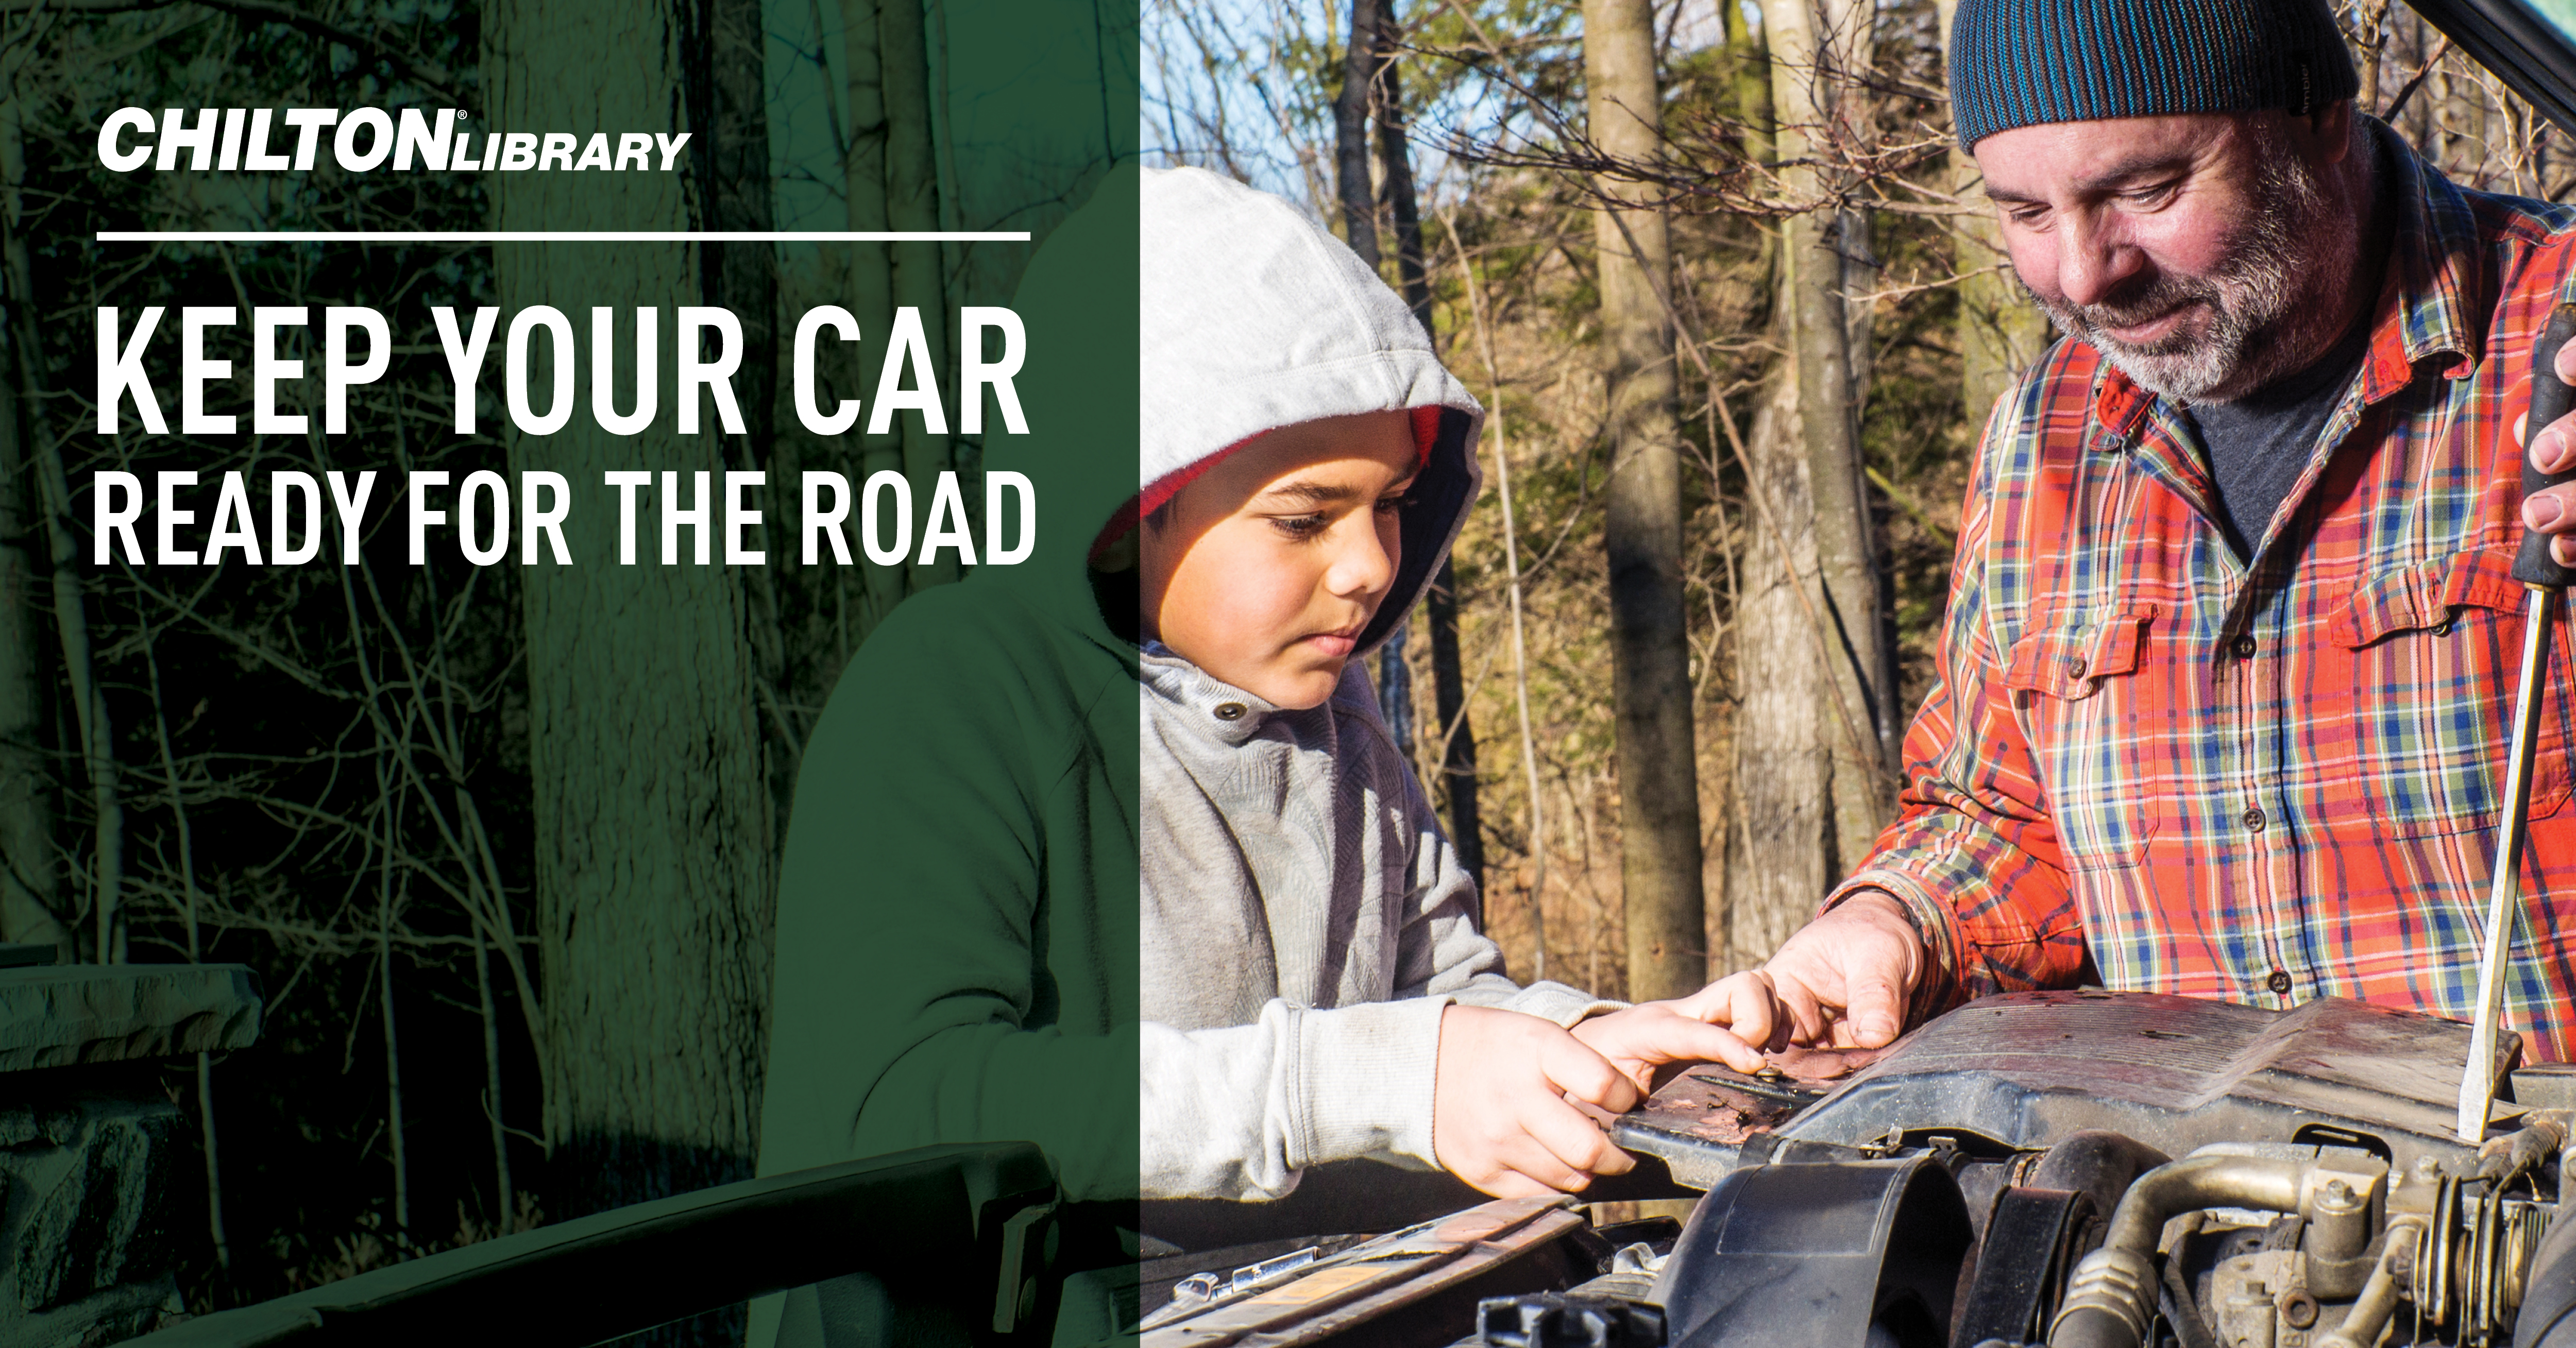 Keep your car ready for the road image.